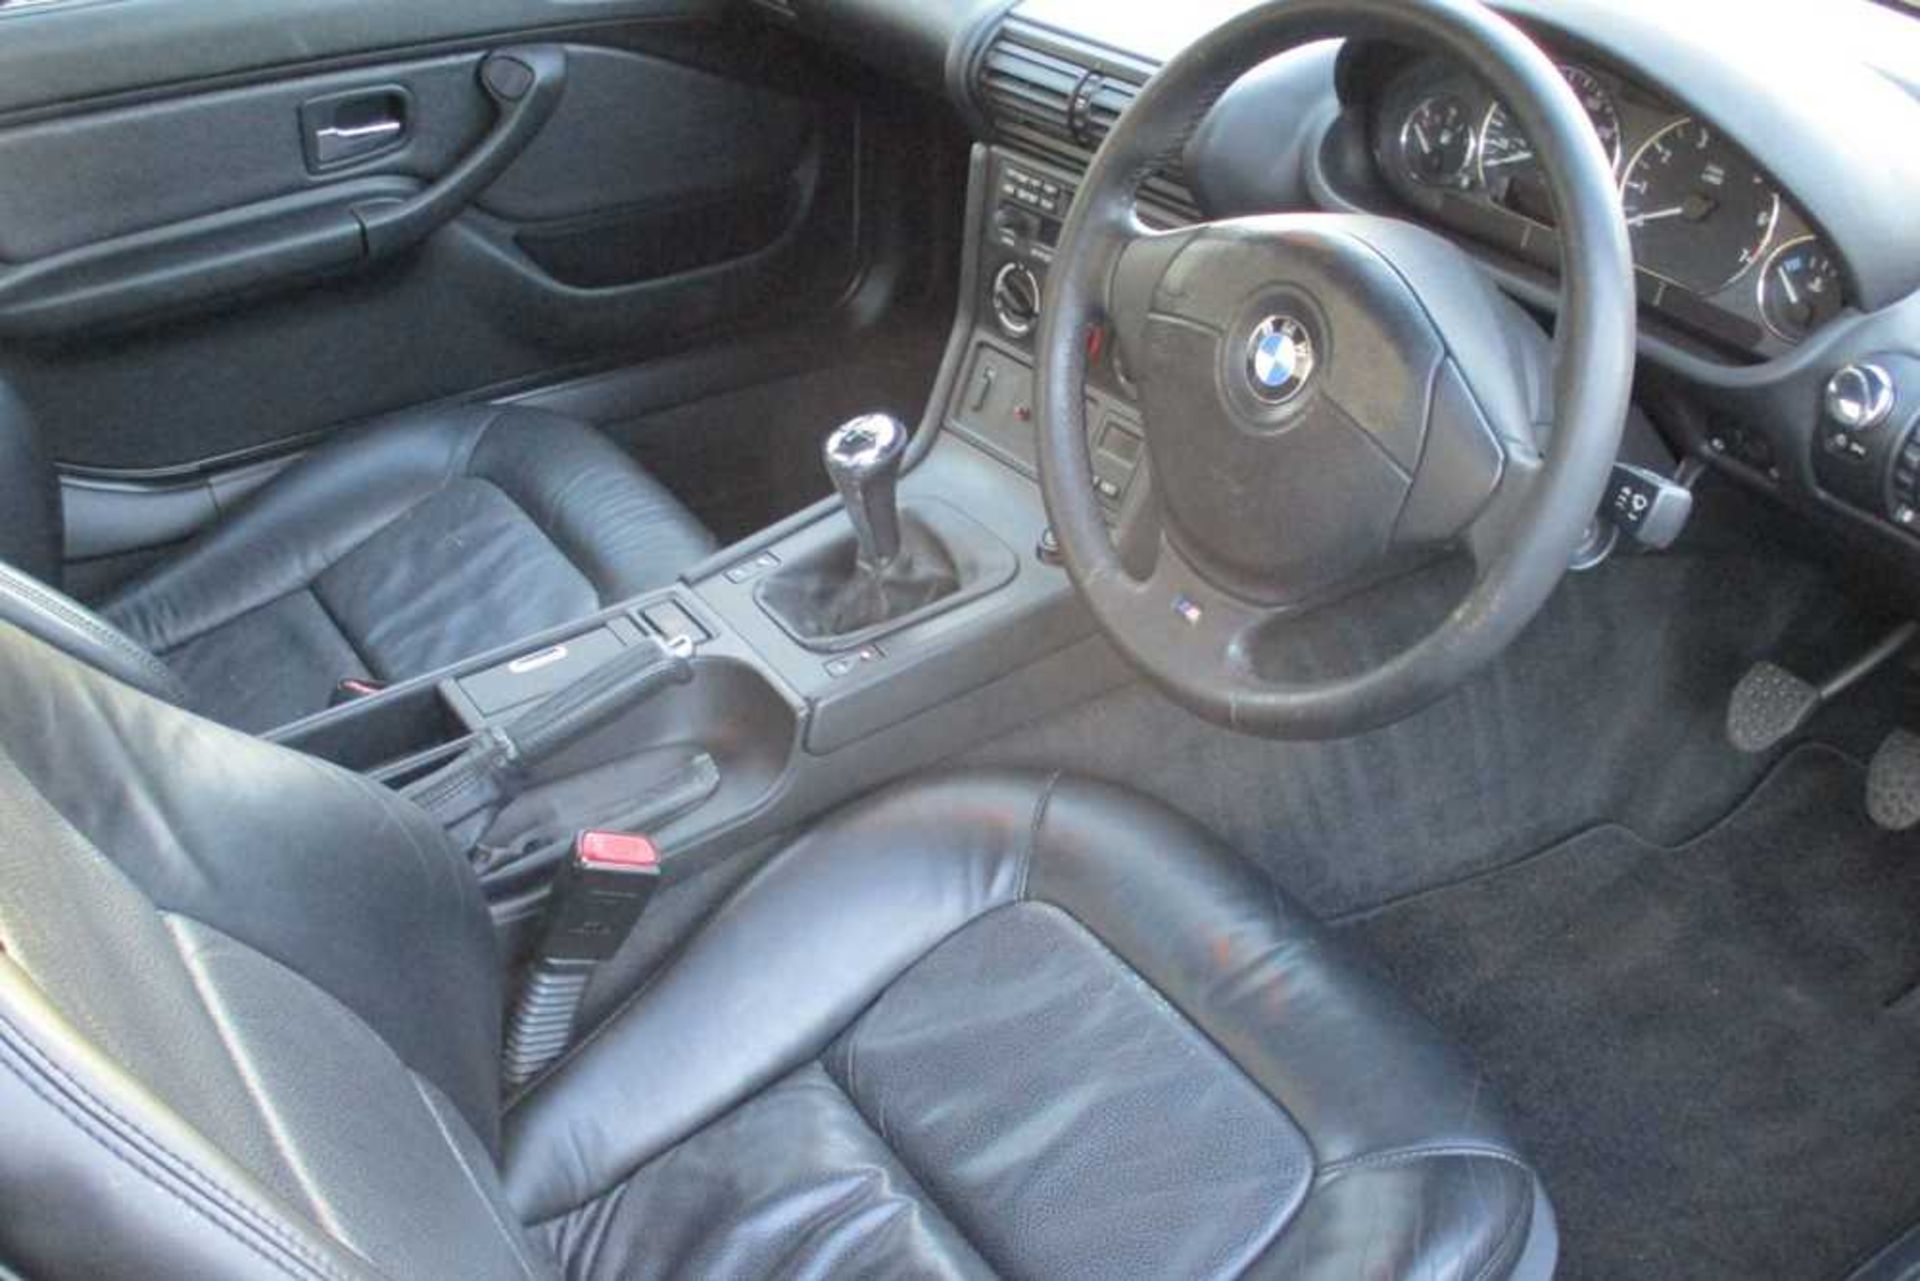 1998 BMW Z3 Roadster - Image 7 of 9